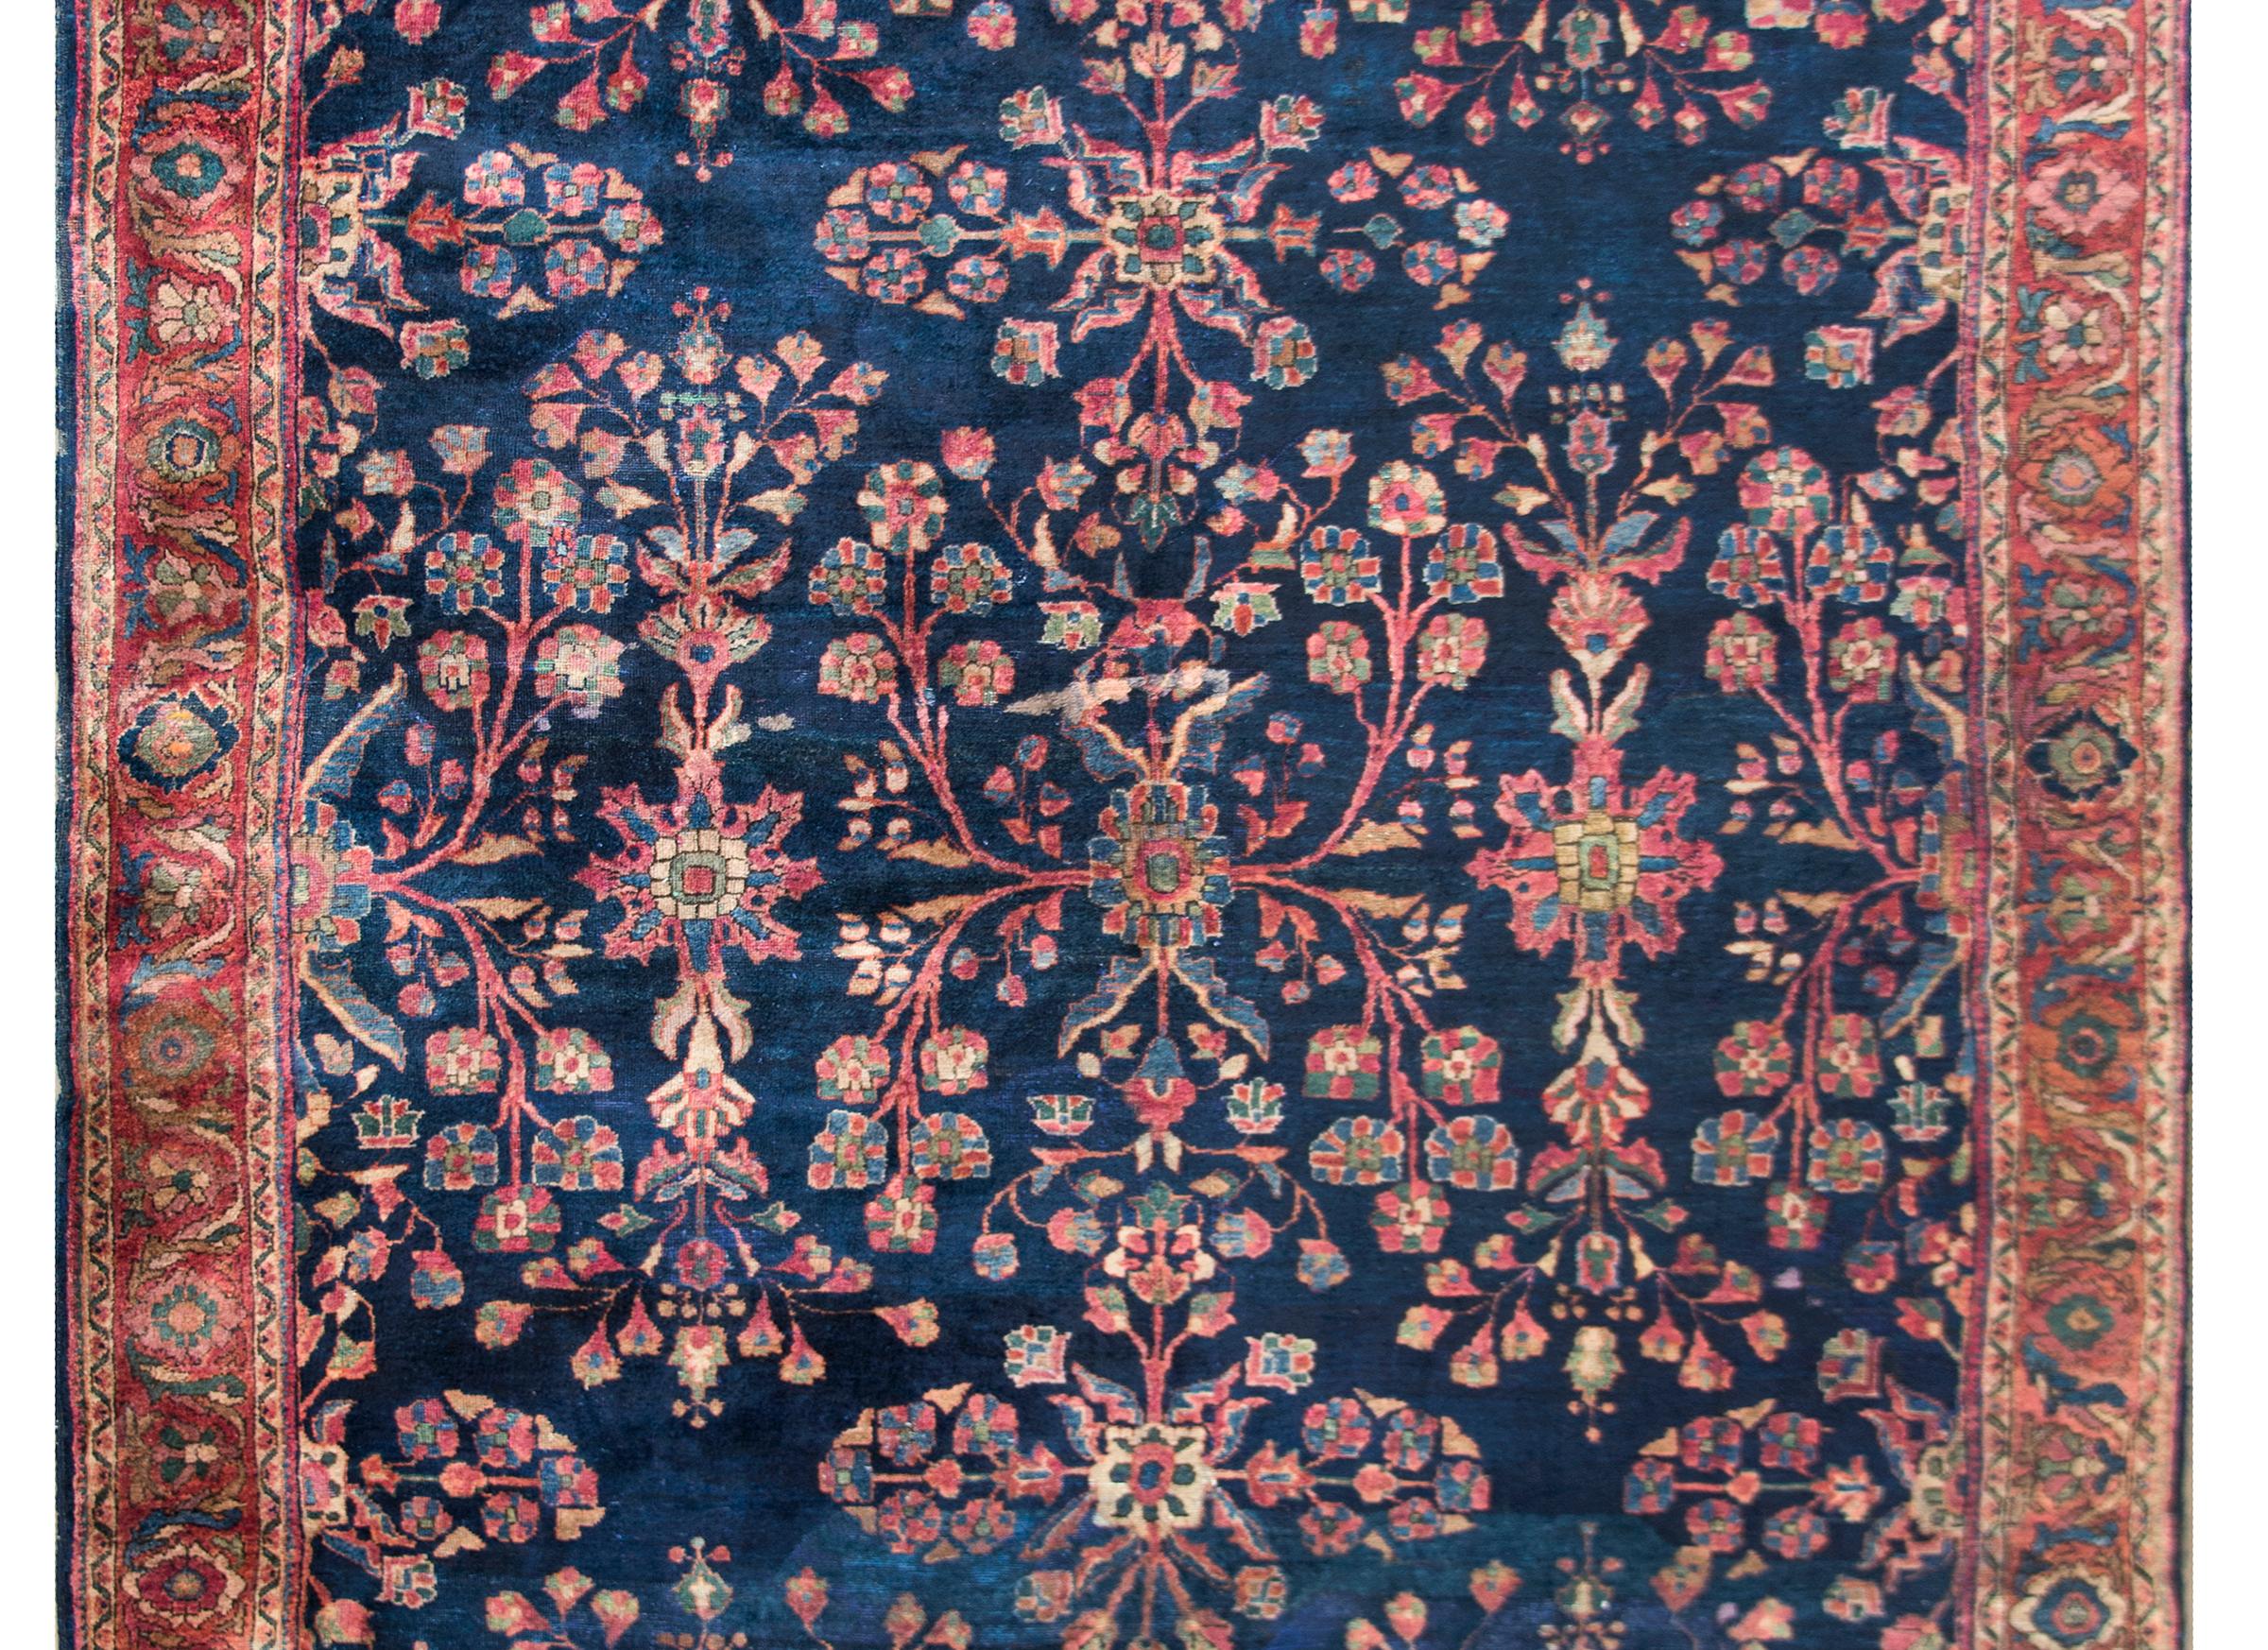 A beautiful early 20th century Persian Sarouk rug with a large-scale mirrored floral pattern woven in pinks, corals, indigos, and creams, and set against a dark indigo background. The border is sweet with a petite floral and leaf pattern, flanked by